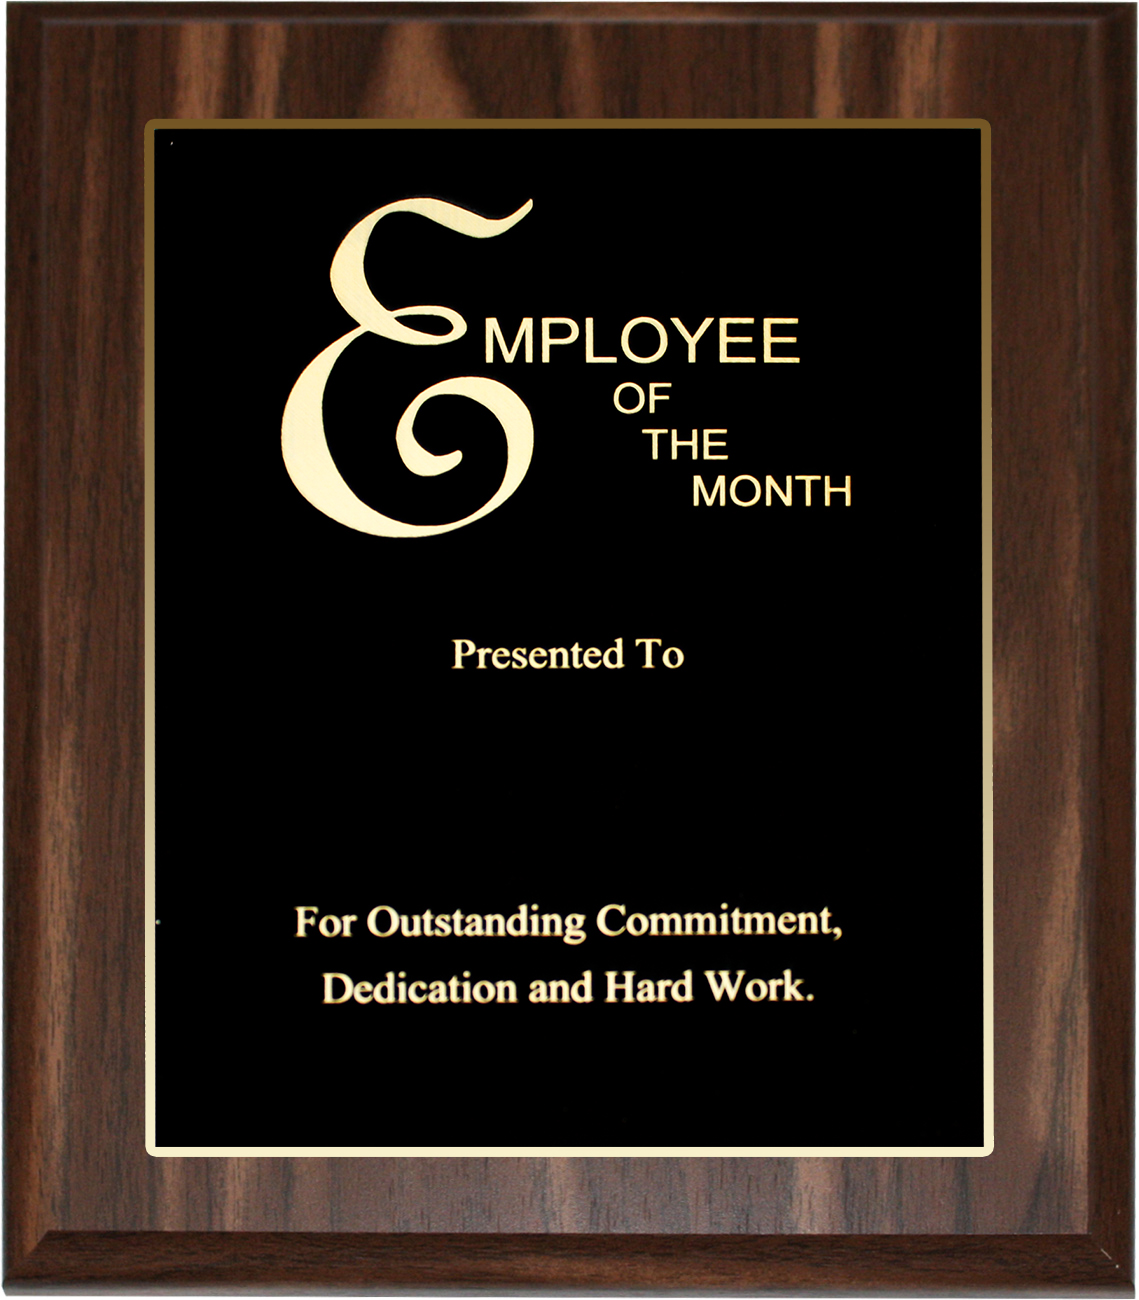 Employee Of The Month Plaque Template - Vegas Trophies